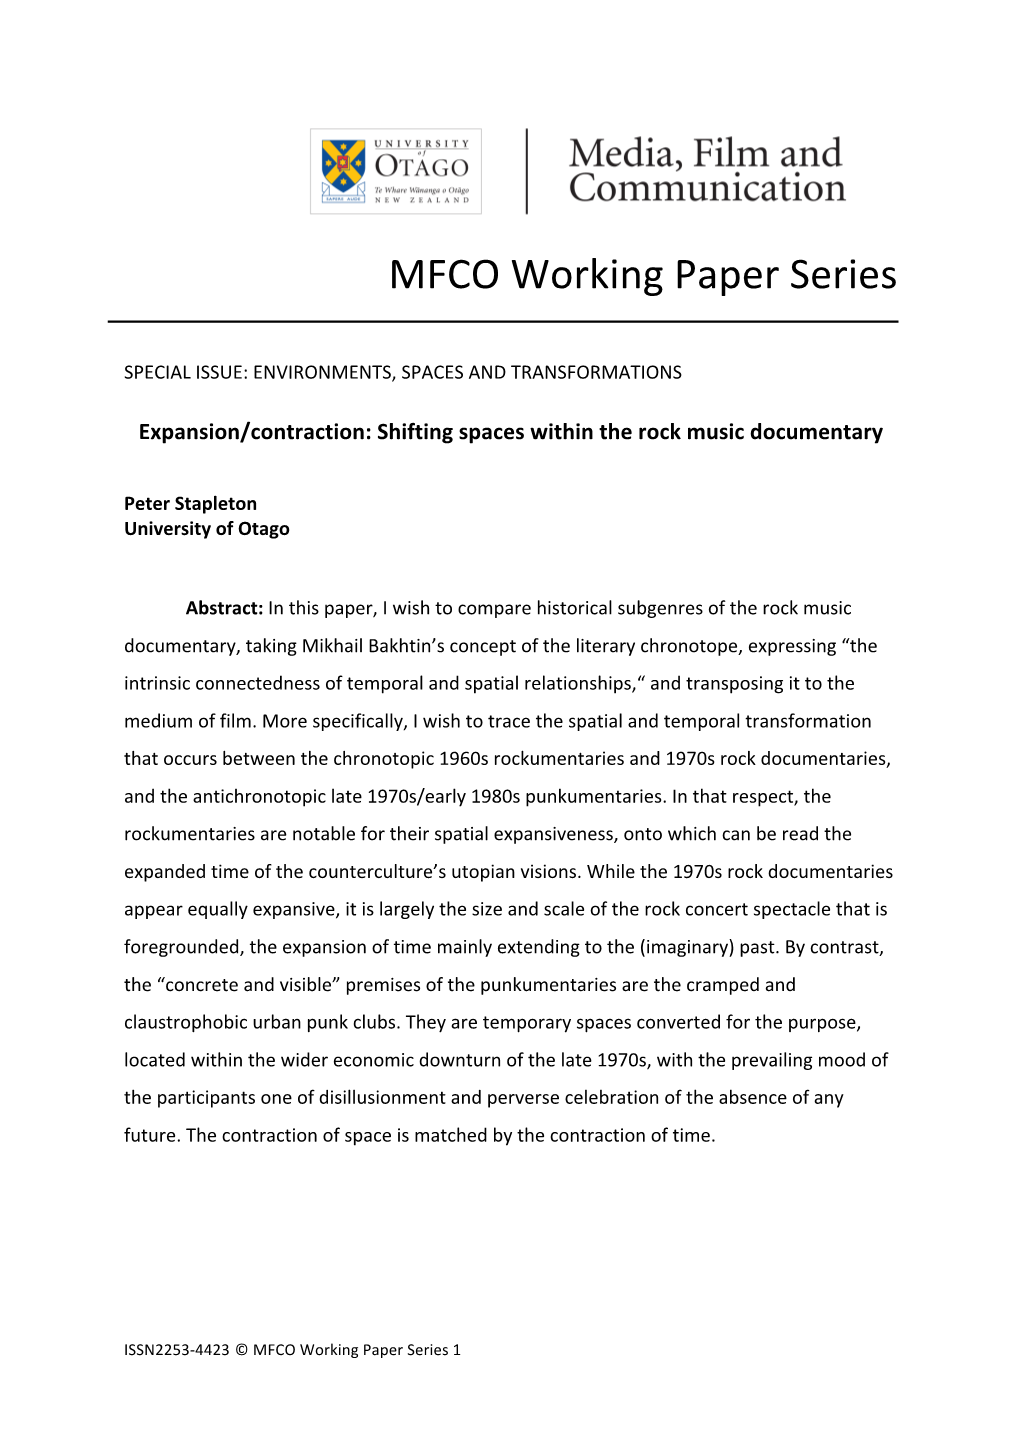 MFCO Working Paper Series